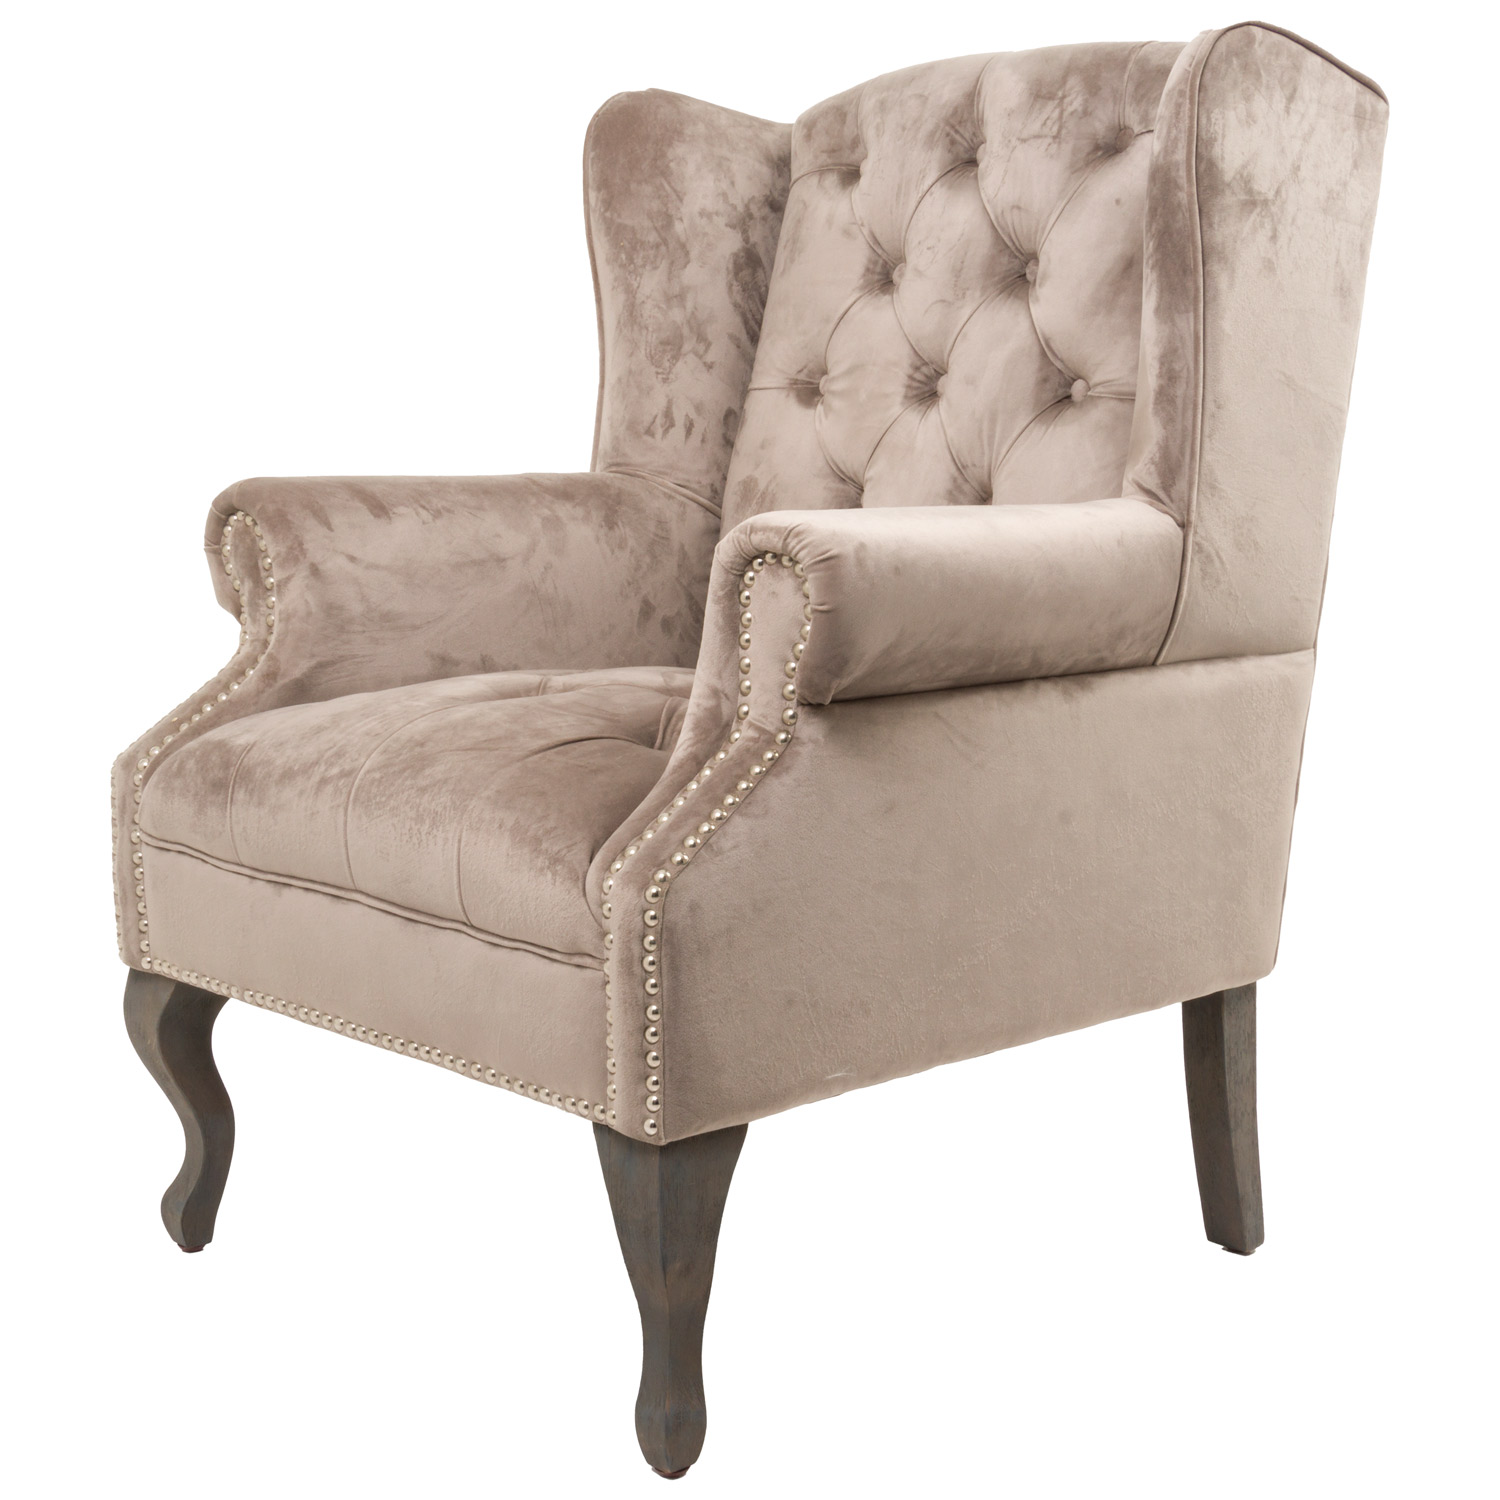 Chelsea Button Pressed Wing Chair - Image 4